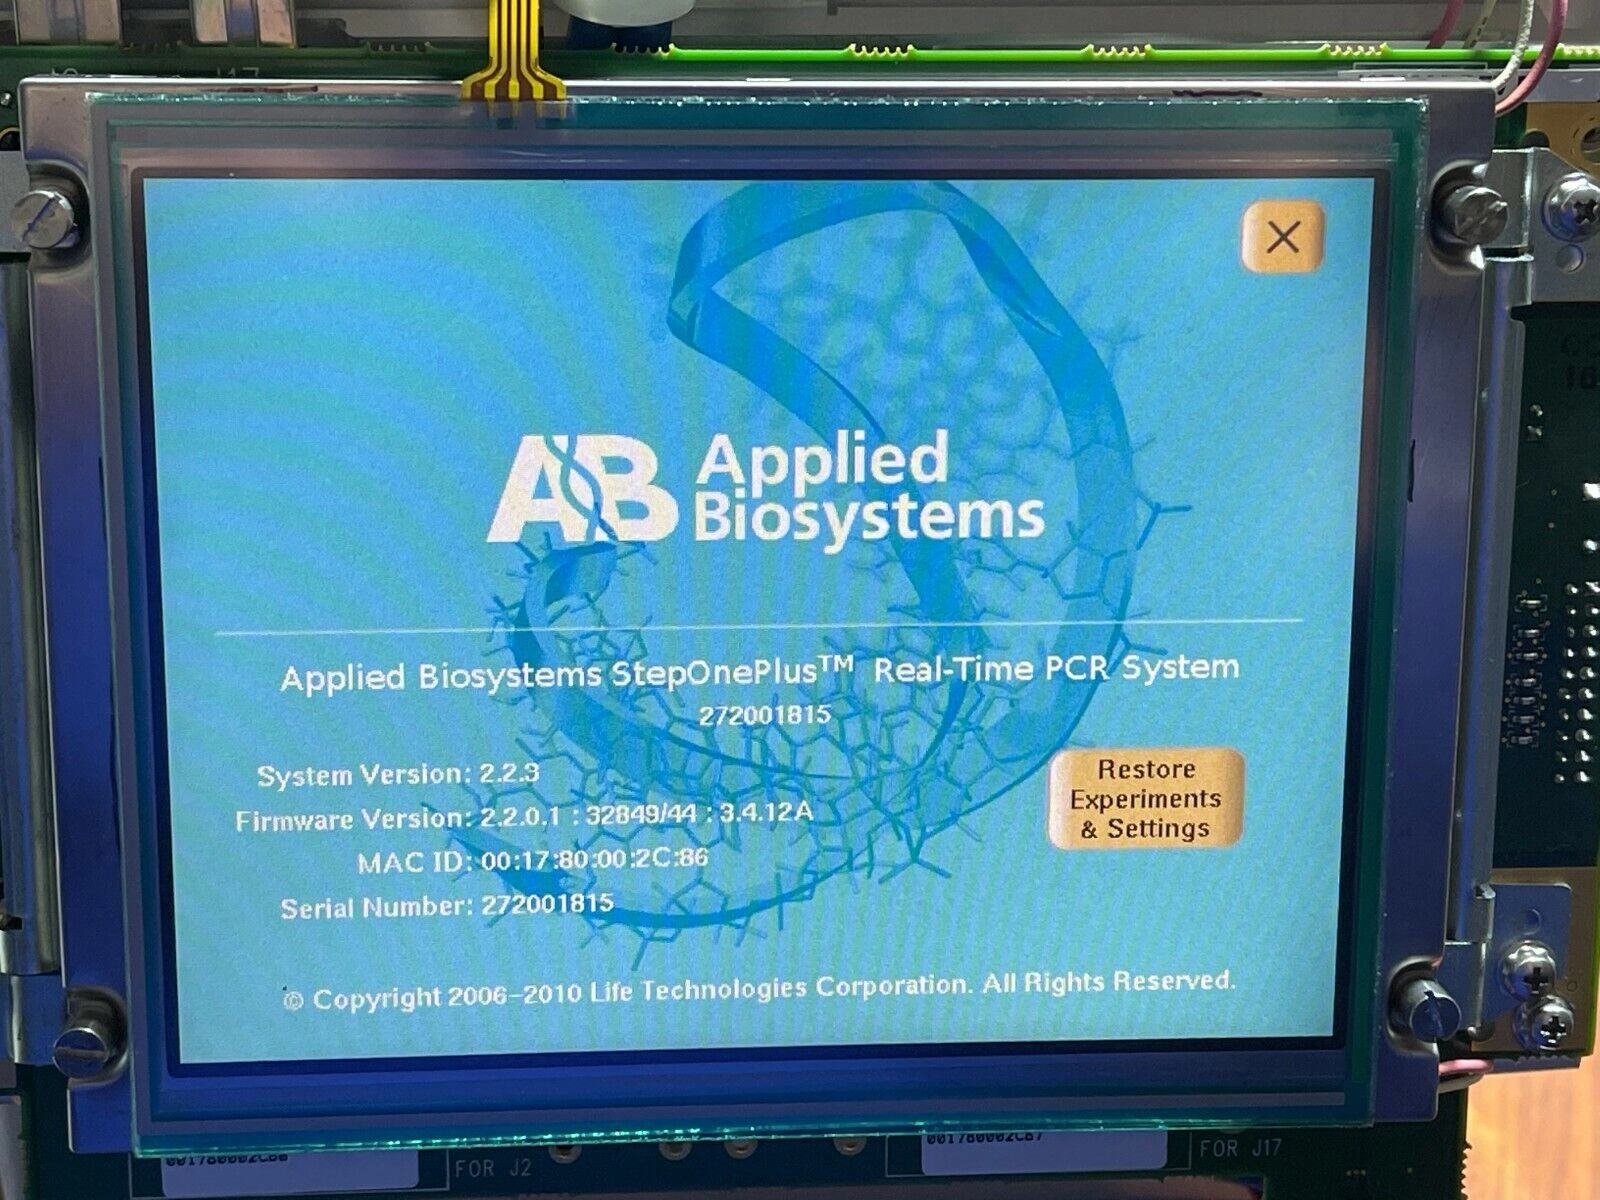 Applied biosystems ABI StepOne & StepOne Plus only